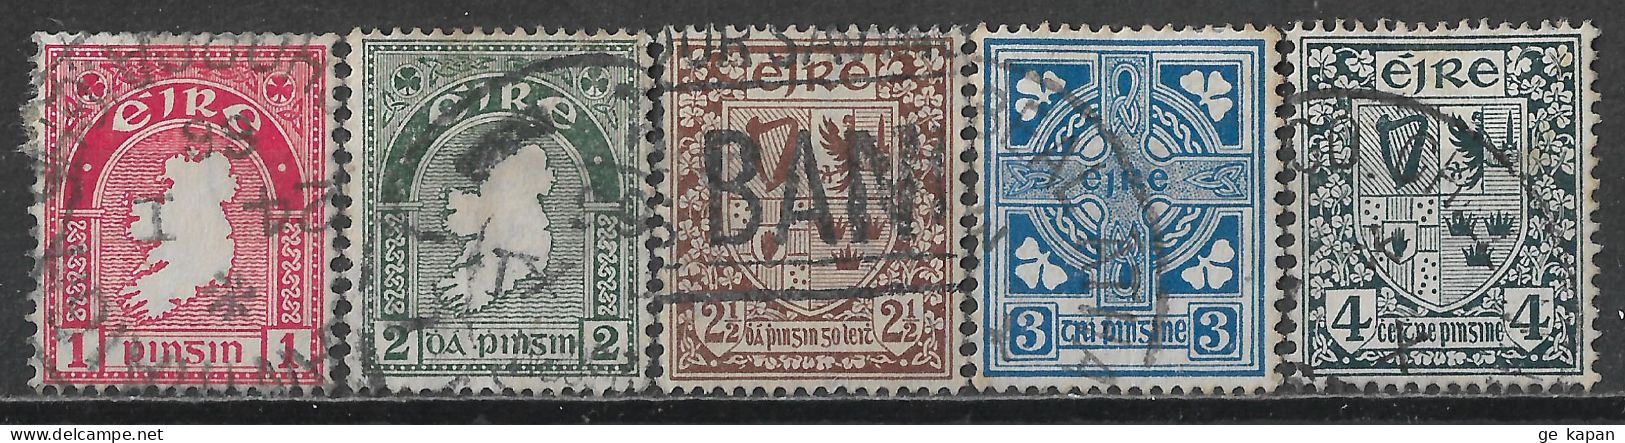 1940-1941 IRELAND SET OF 5 USED STAMPS (Michel # 72A,74A,75A,76AI,77A) CV €1.80 - Gebraucht